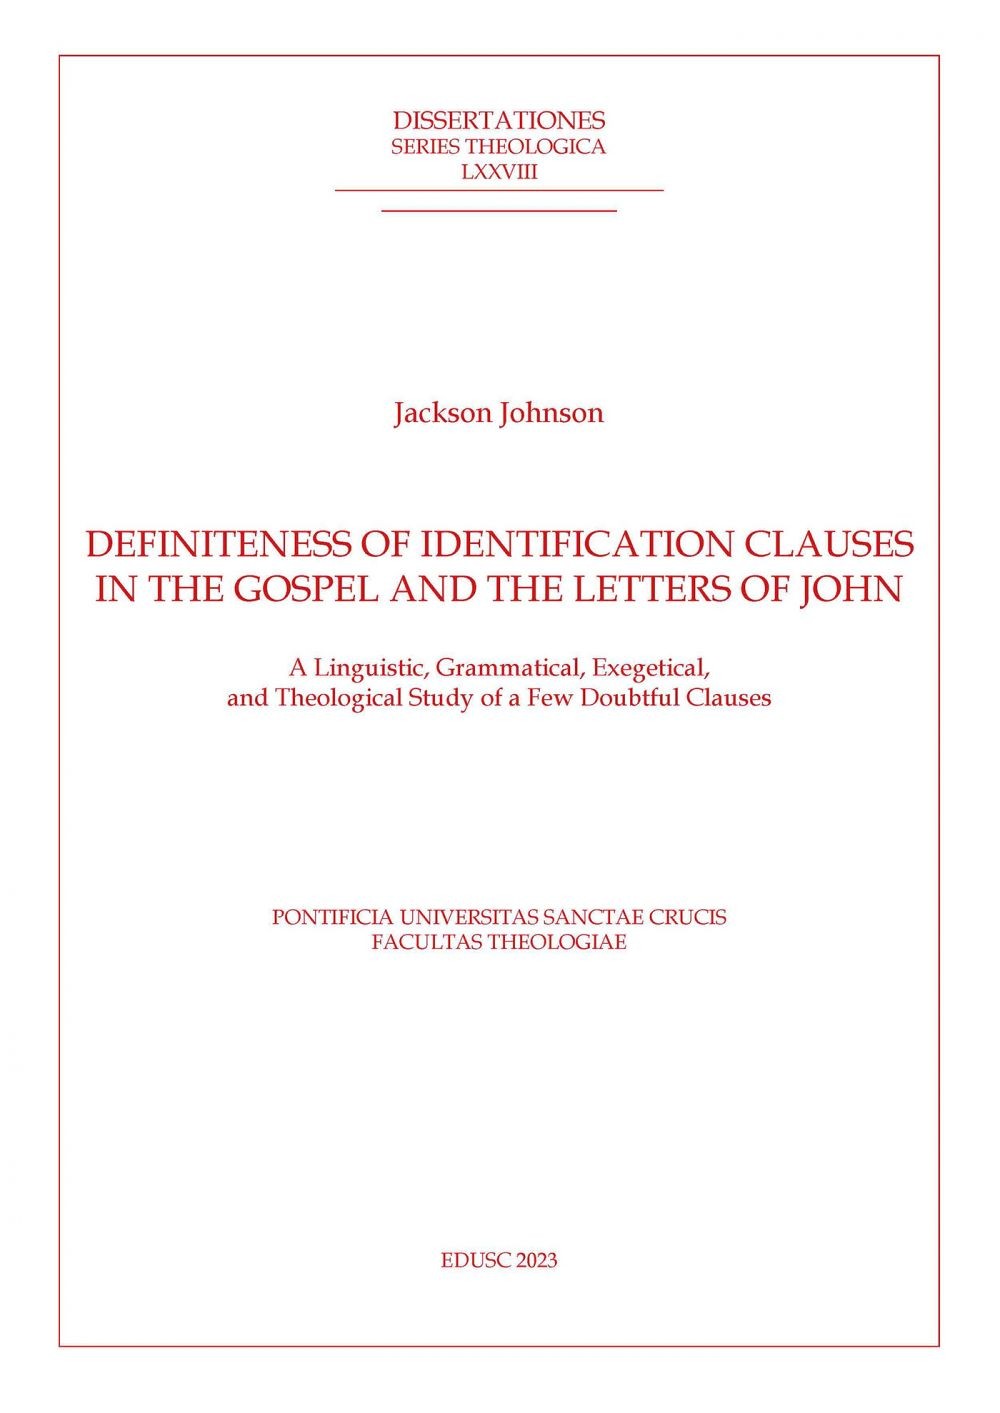 Definiteness of Identification Clauses in the Gospel and Letters of John - Librerie.coop